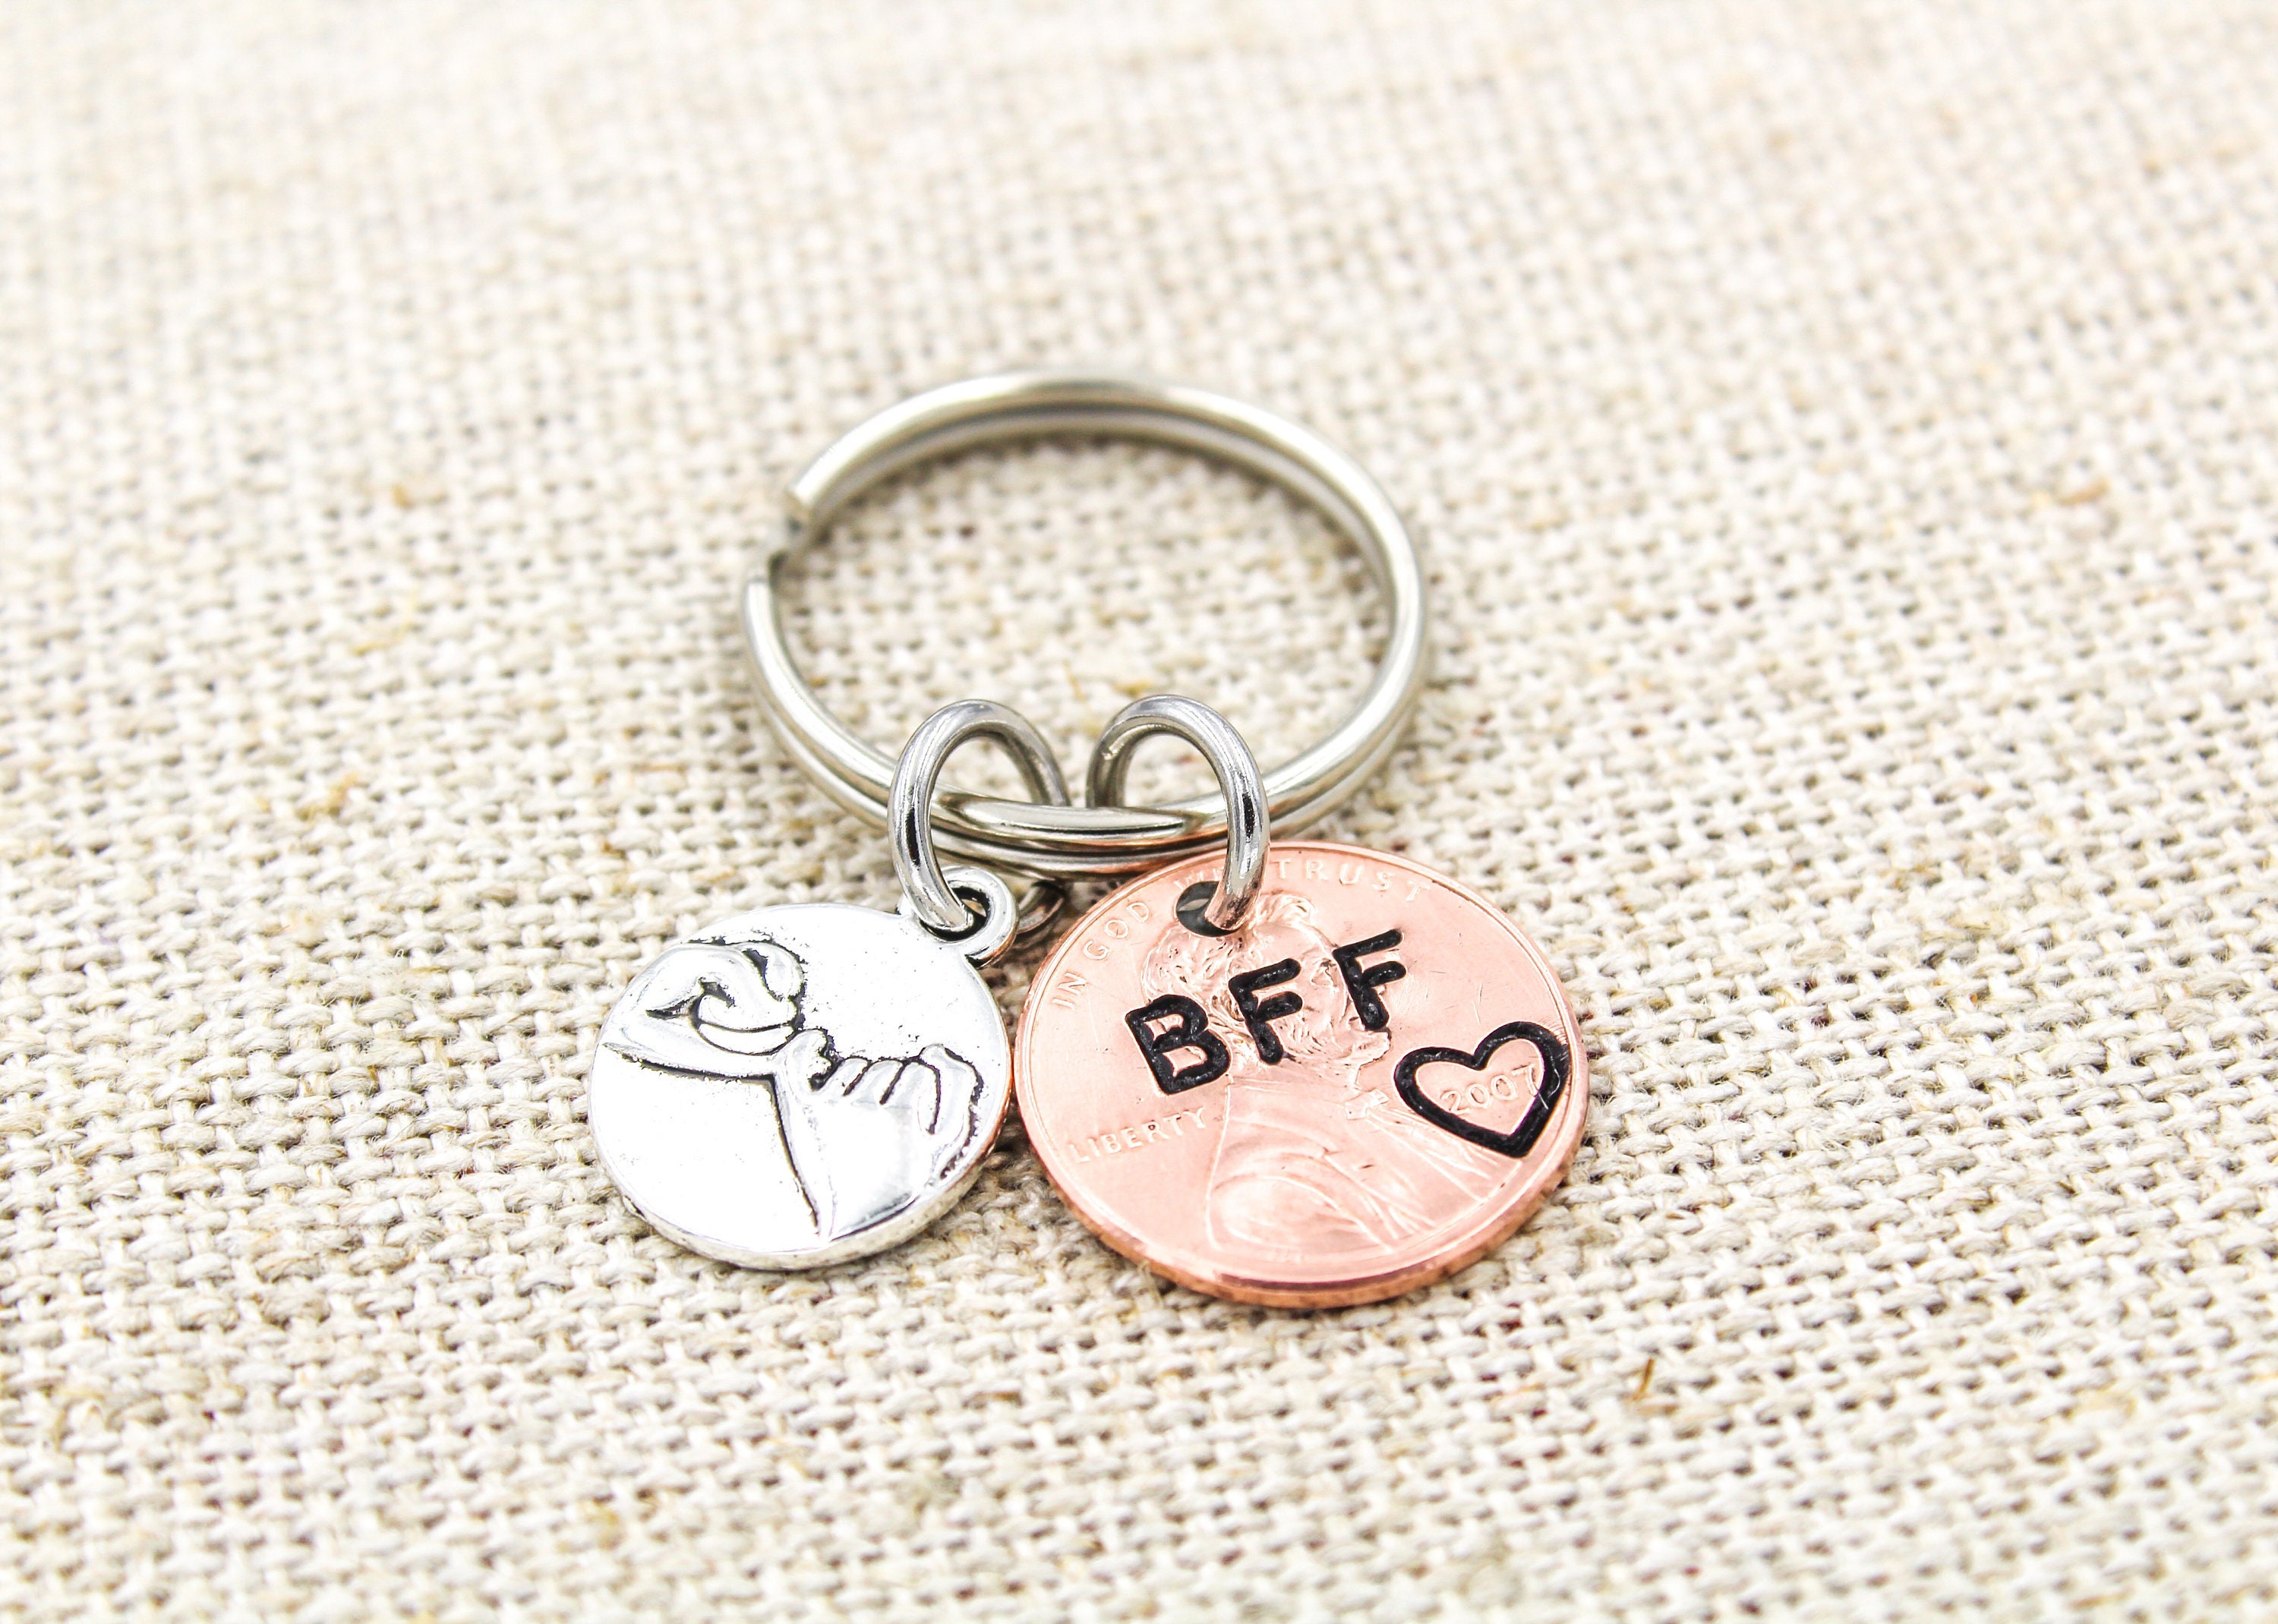 Friend Gift Keyring With Sunglasses Charm